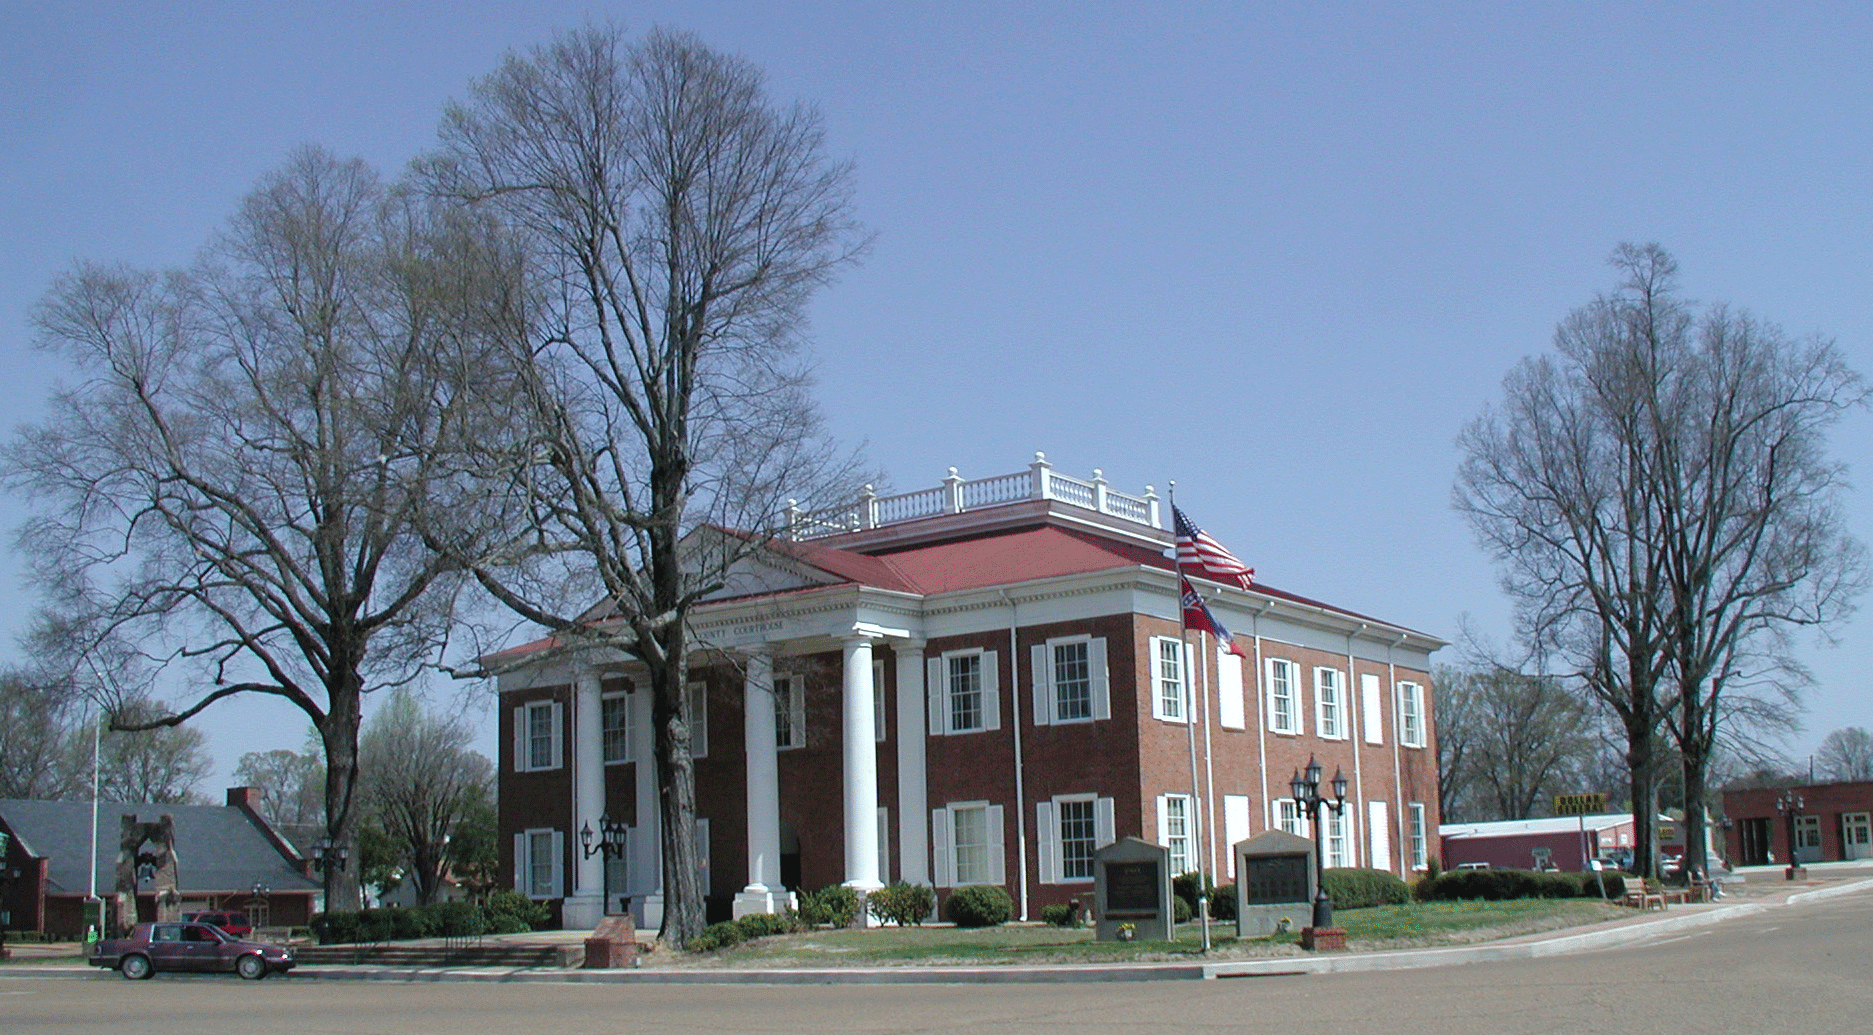 Tallahatchie County Courthouse